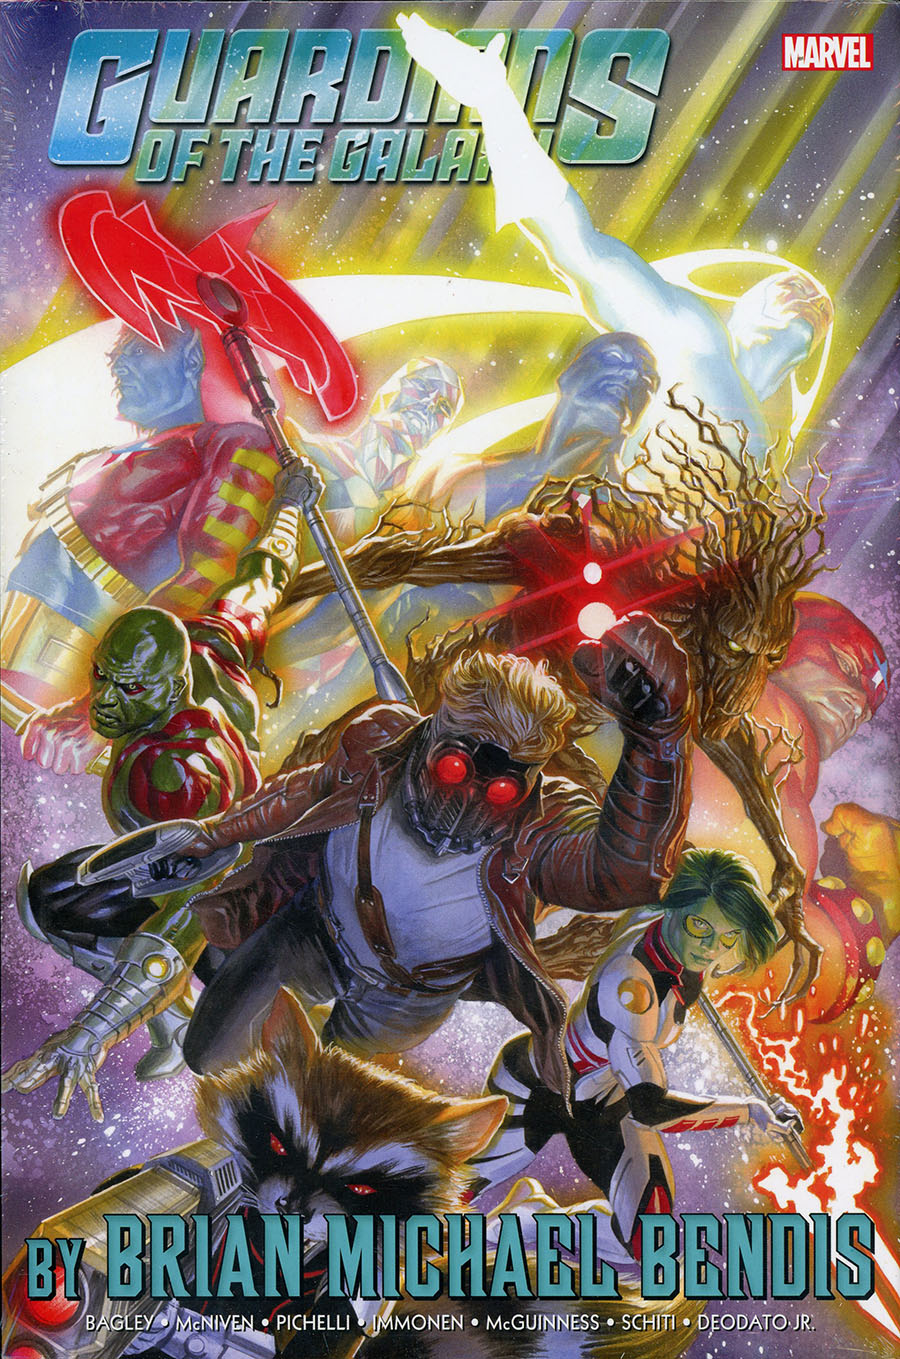 Guardians Of The Galaxy By Brian Michael Bendis Omnibus Vol 1 HC Direct Market Alex Ross Variant Cover New Printing